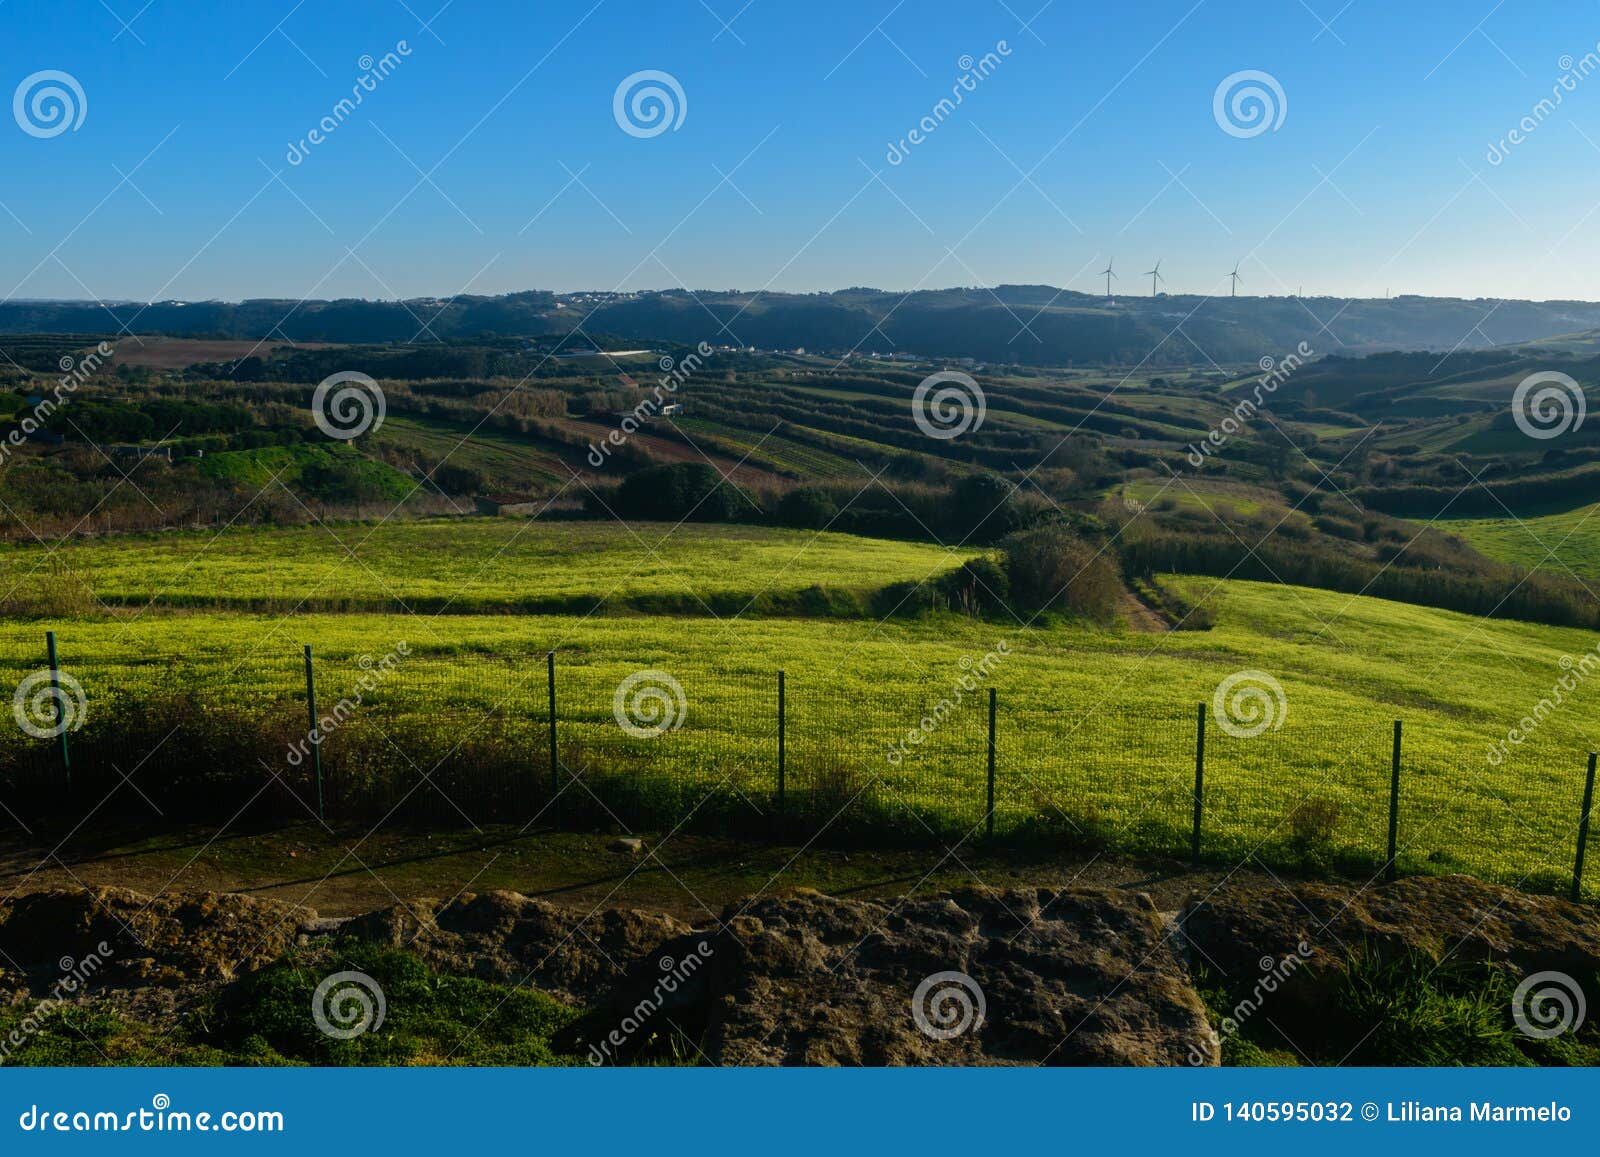 fields with yellow flowers and aerogenerators background, barril - mafra, portugal